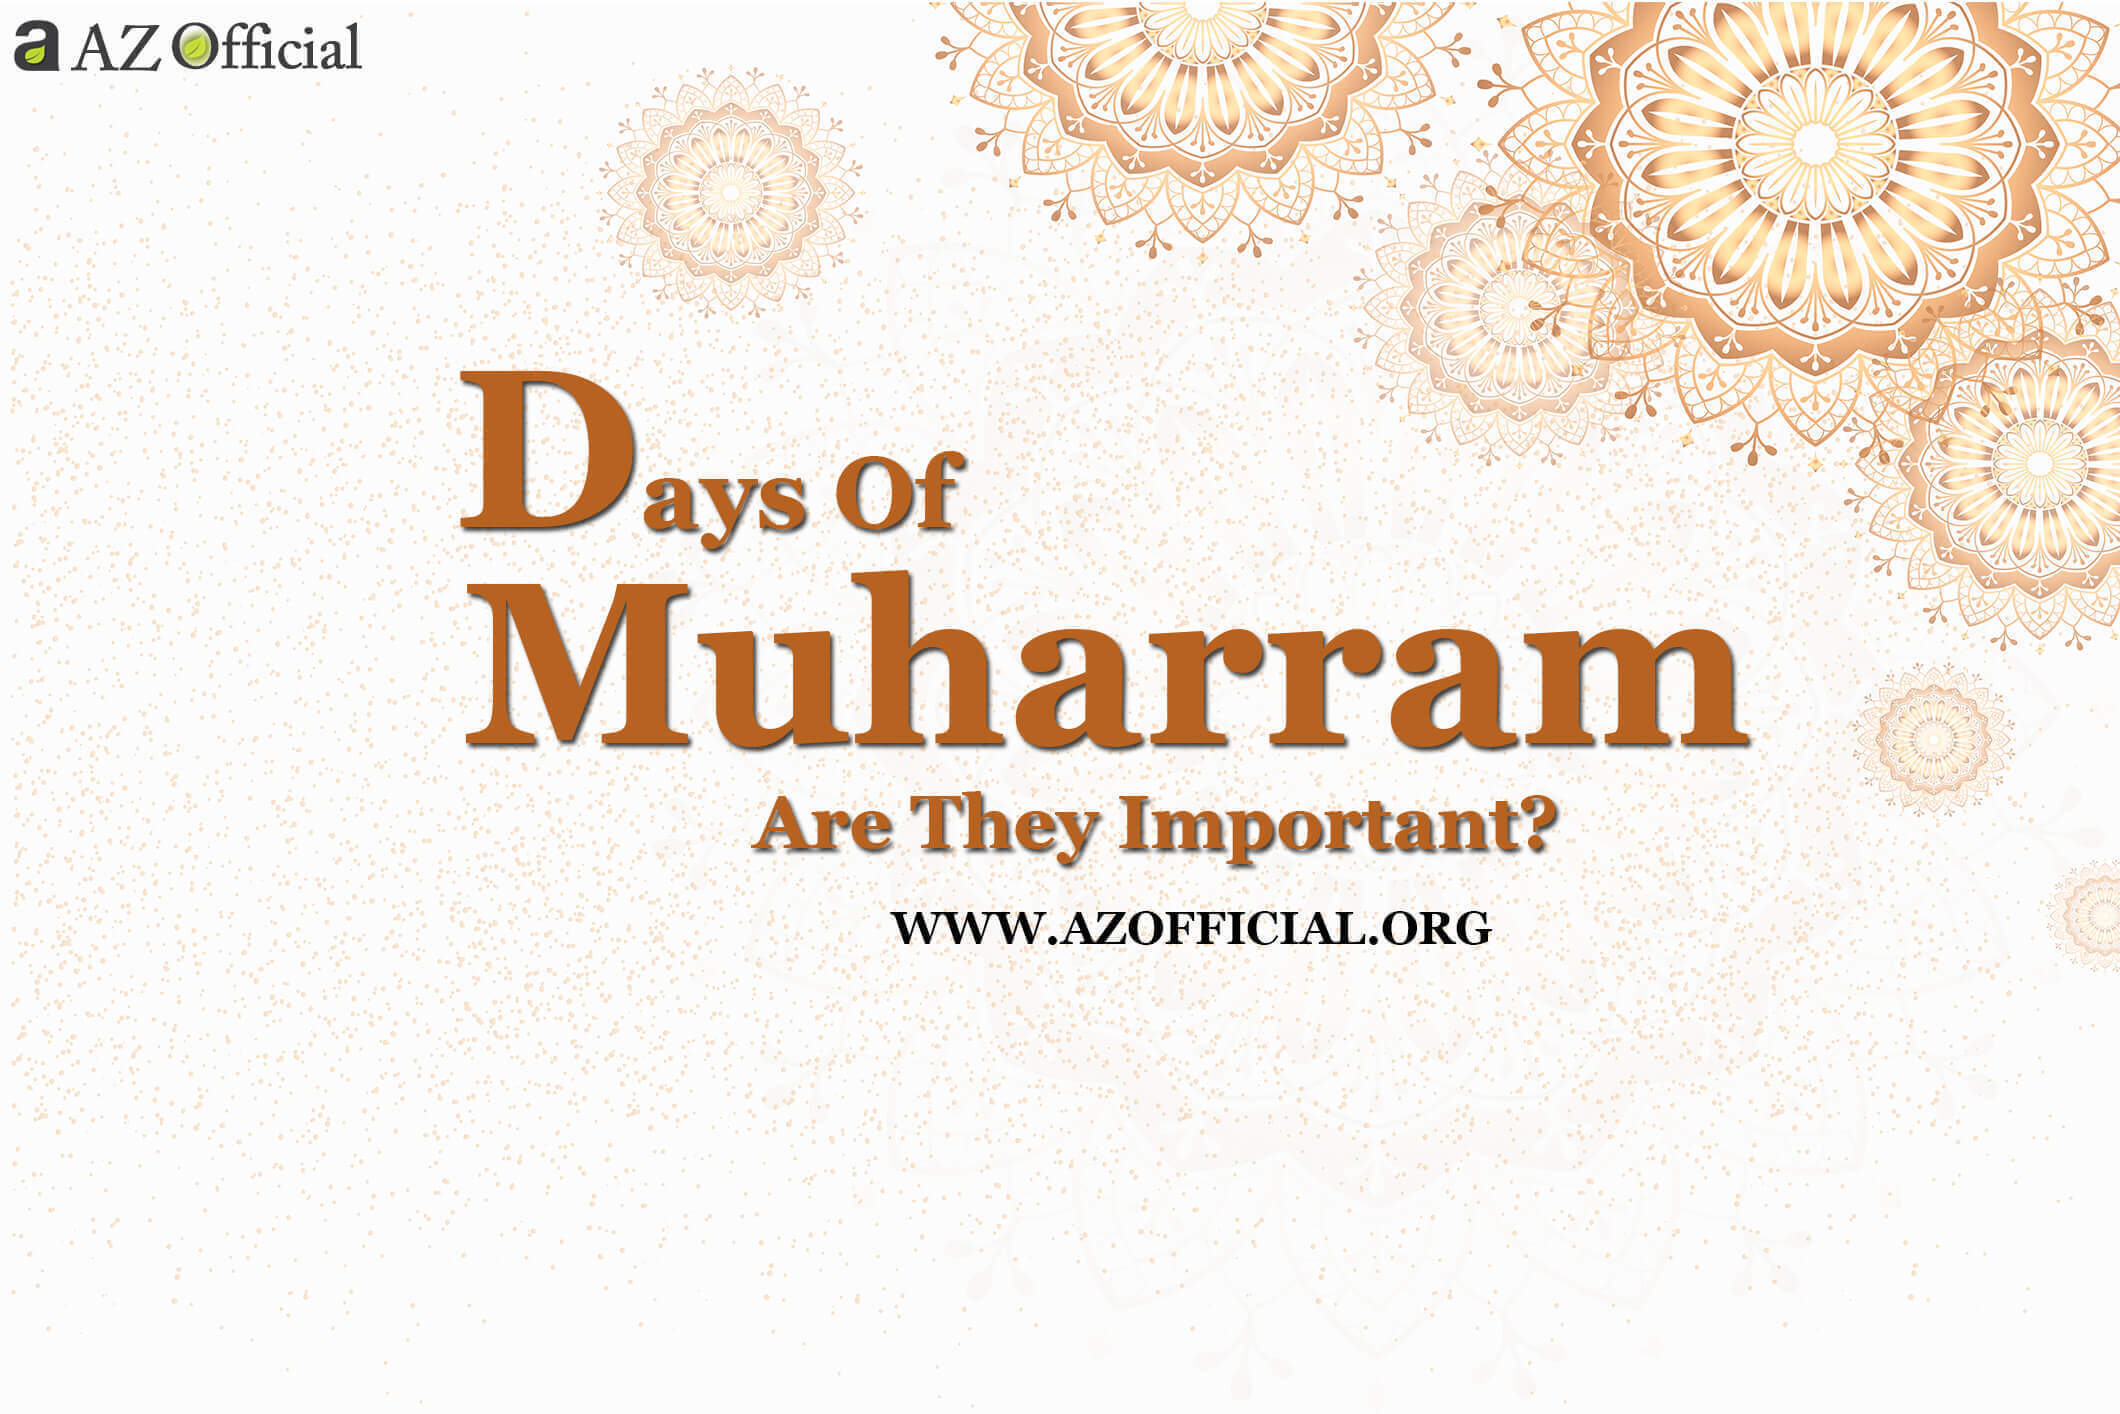 Days of Muharram Are They Important